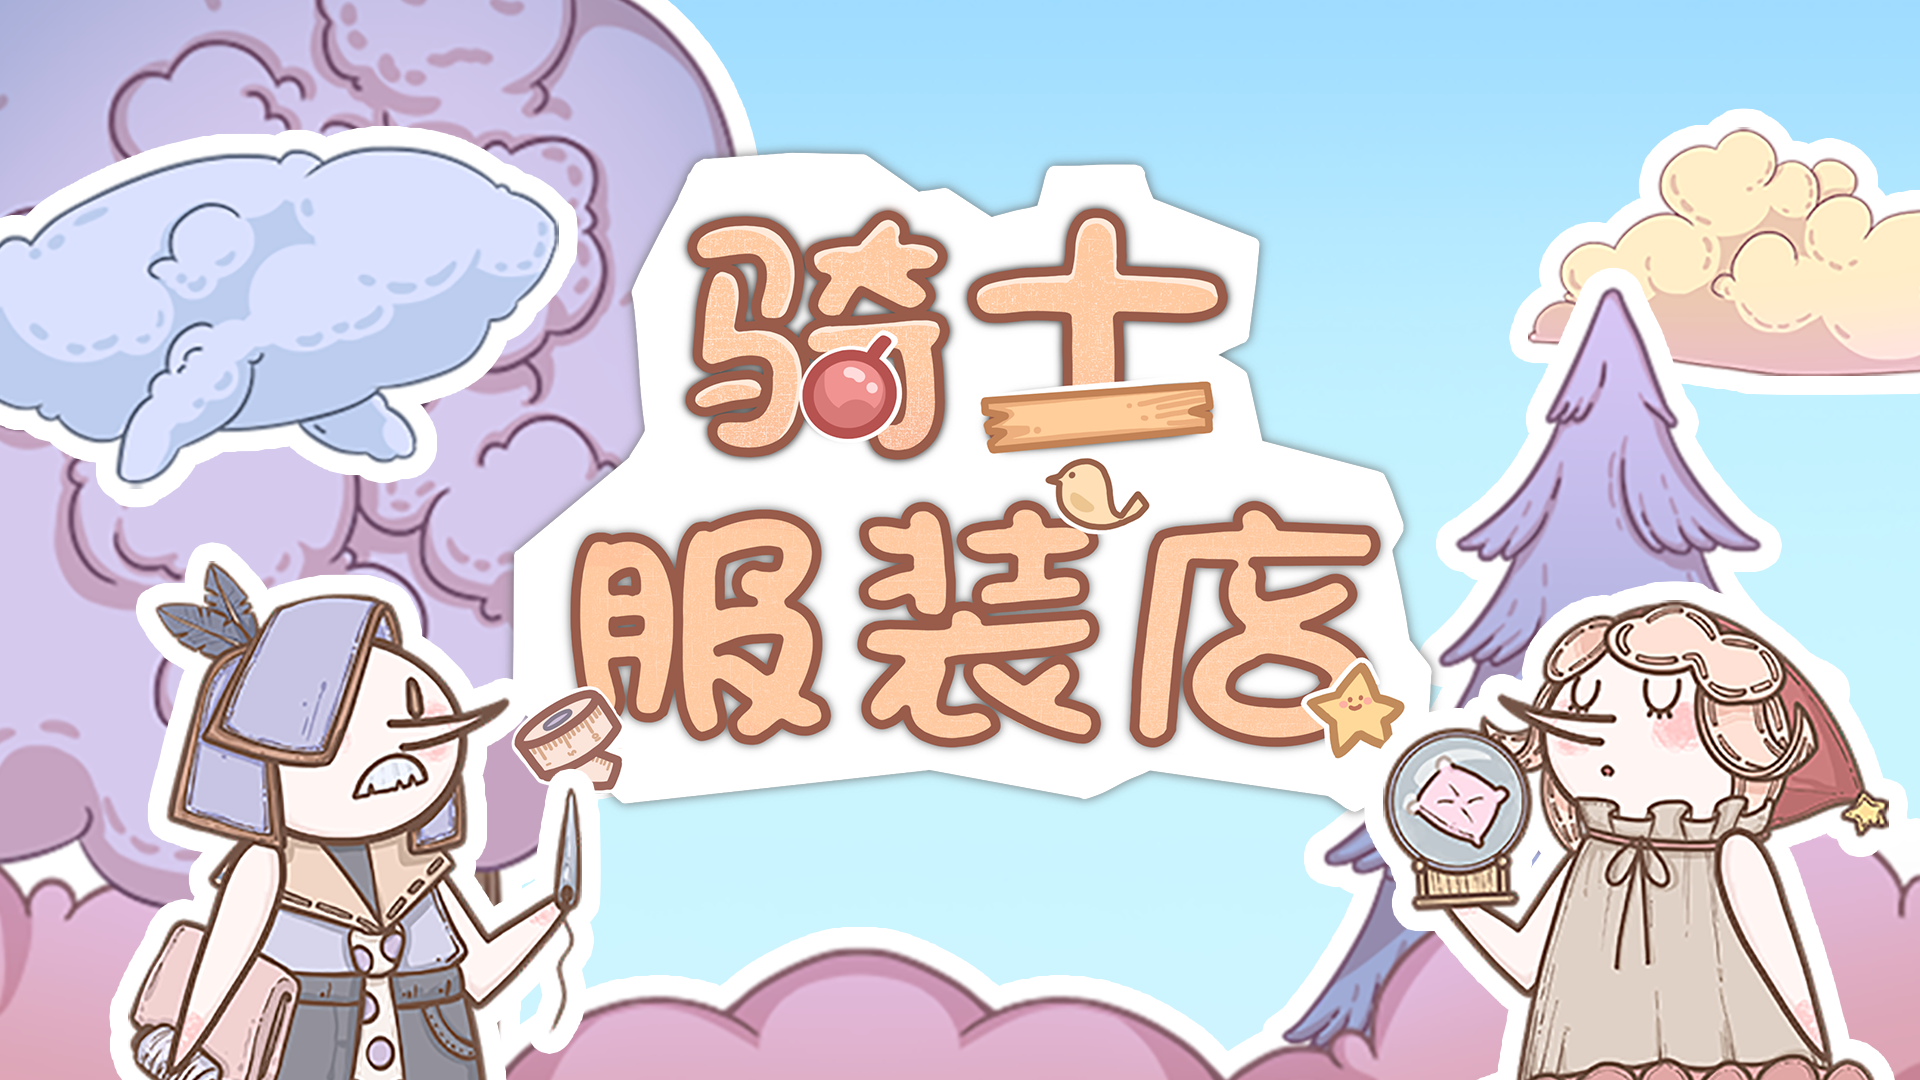 Banner of 騎士衣料品店 